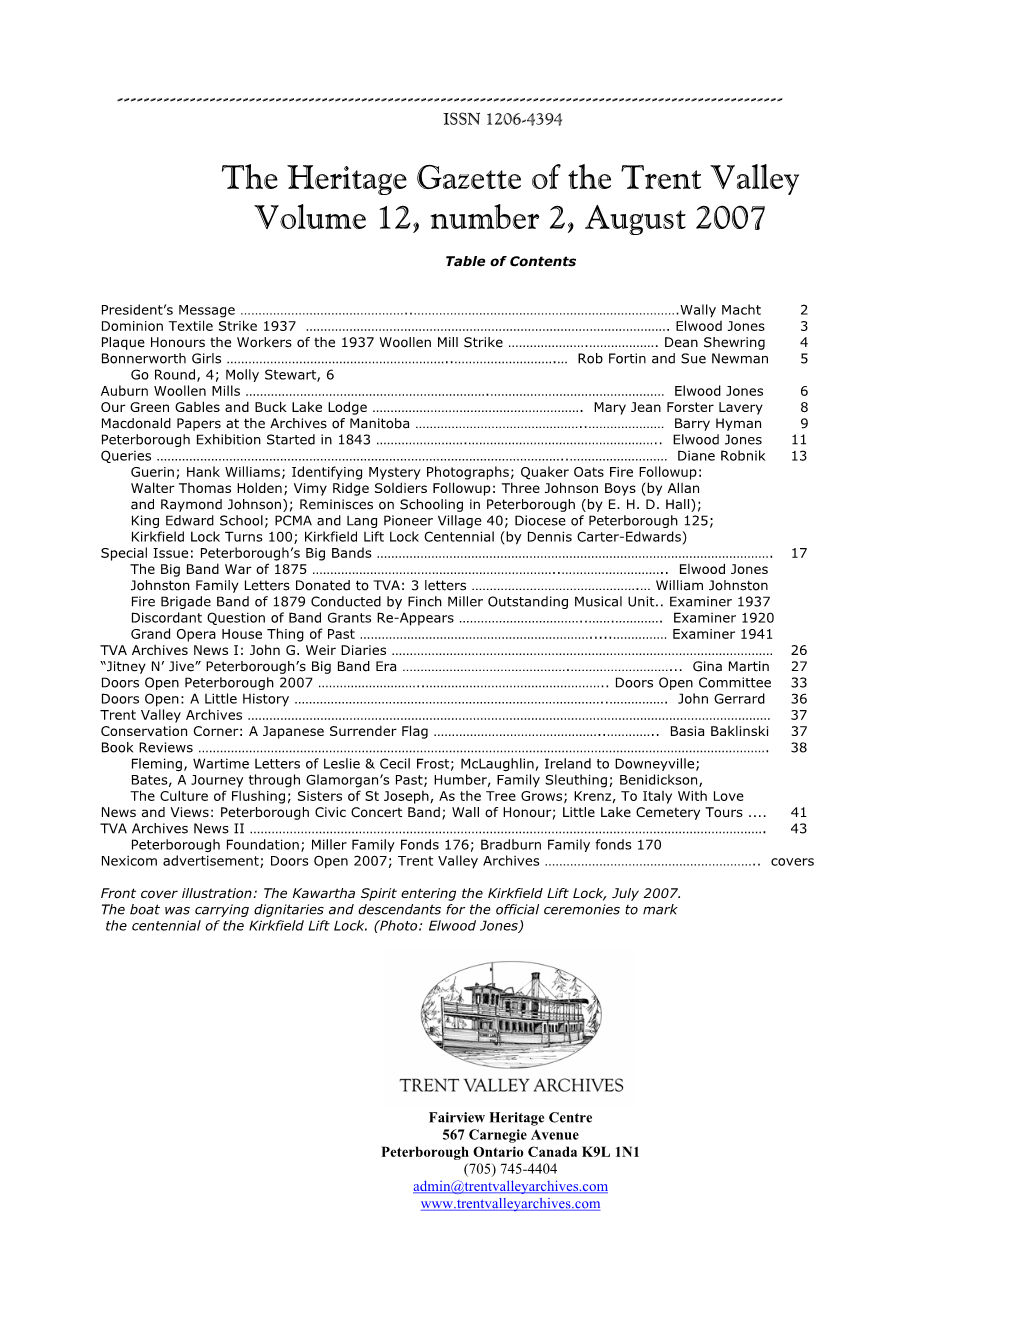 The Heritage Gazette of the Trent Valley Volume 12, Number 2, August 2007